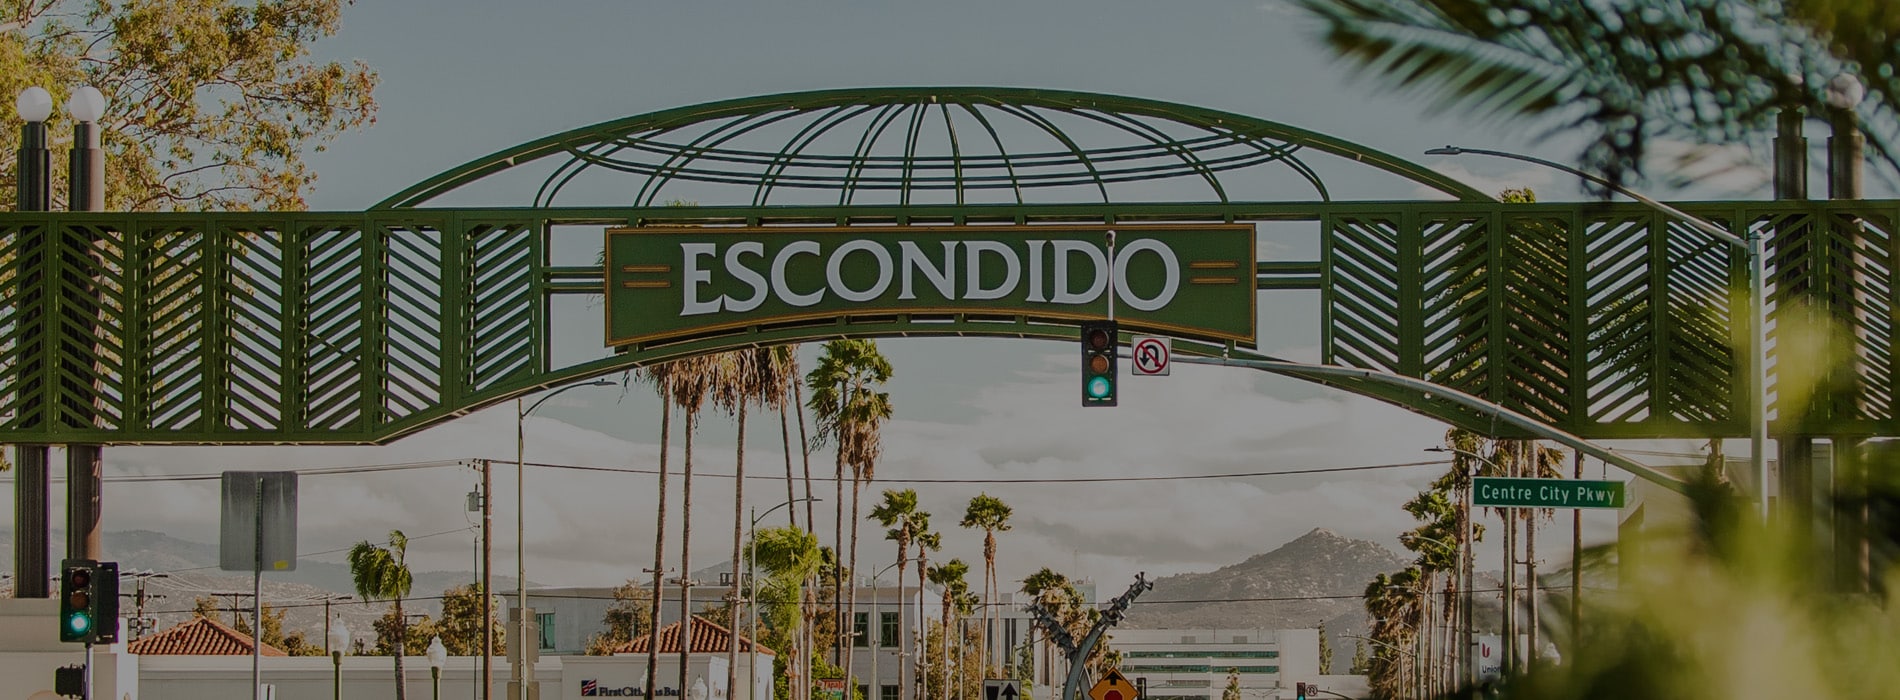 Escondido Grand Avenue Sign. Discover homes for sale opportunities in Escondido San Diego County